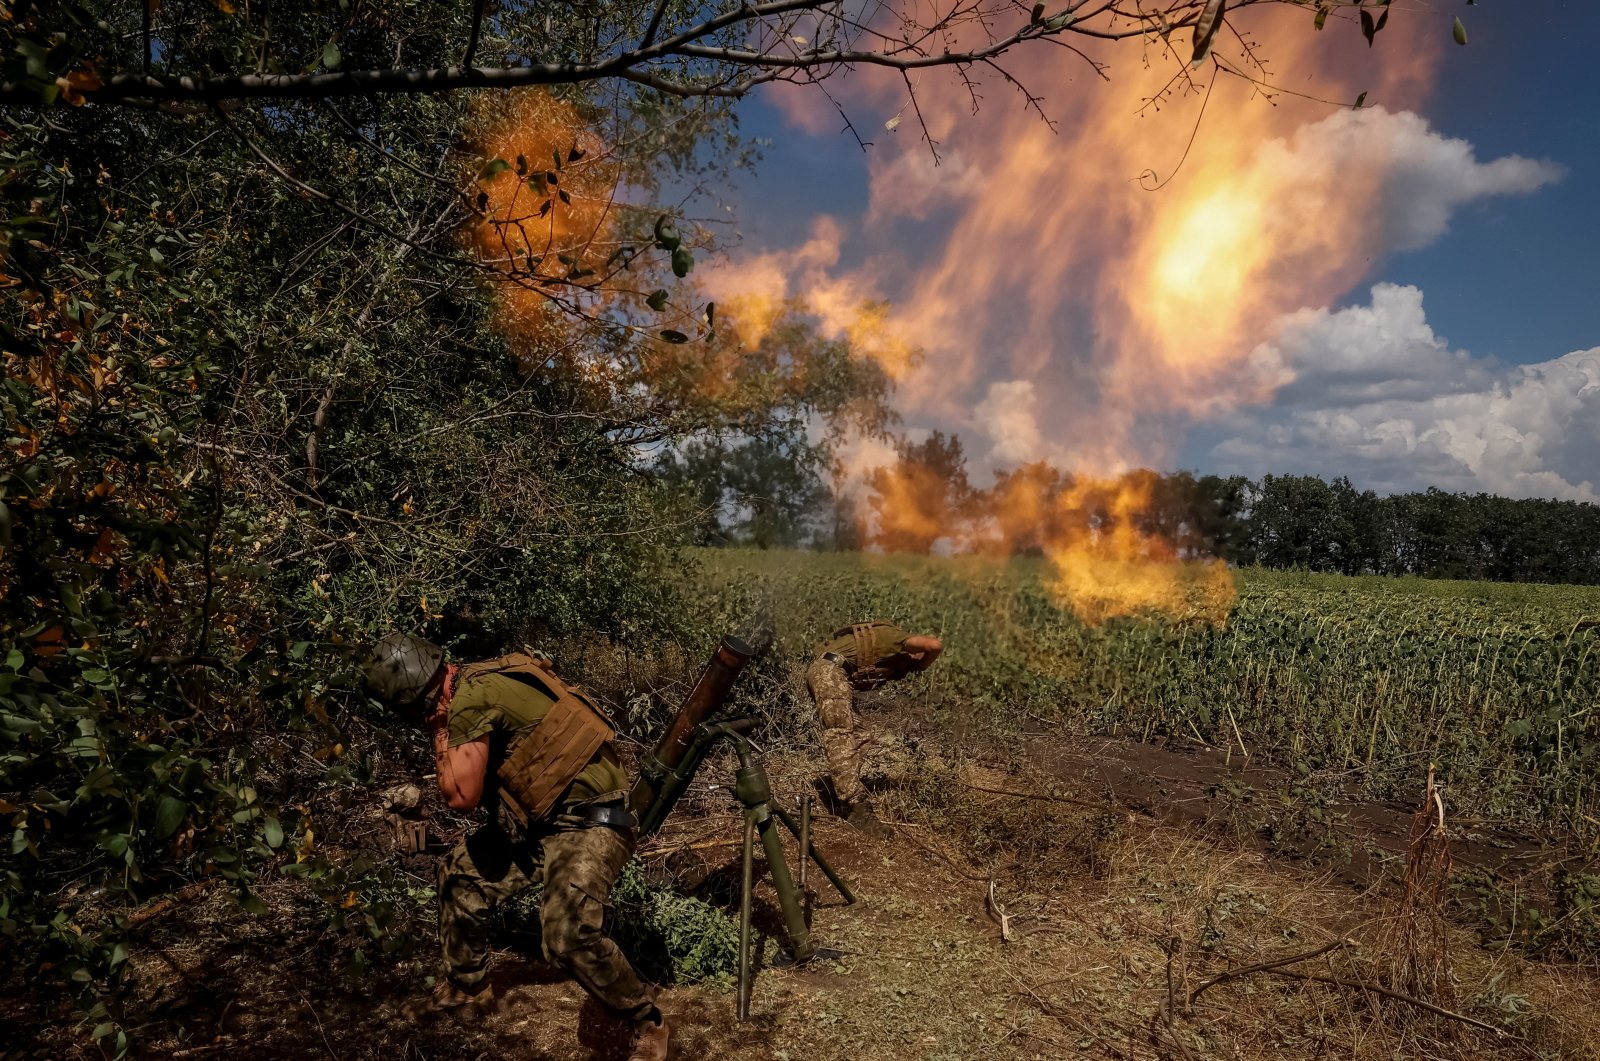 Ukrainian soldiers fire a mortar on a front line, in the Donetsk region, Ukraine, Aug. 18, 2022. (Reuters Photo)